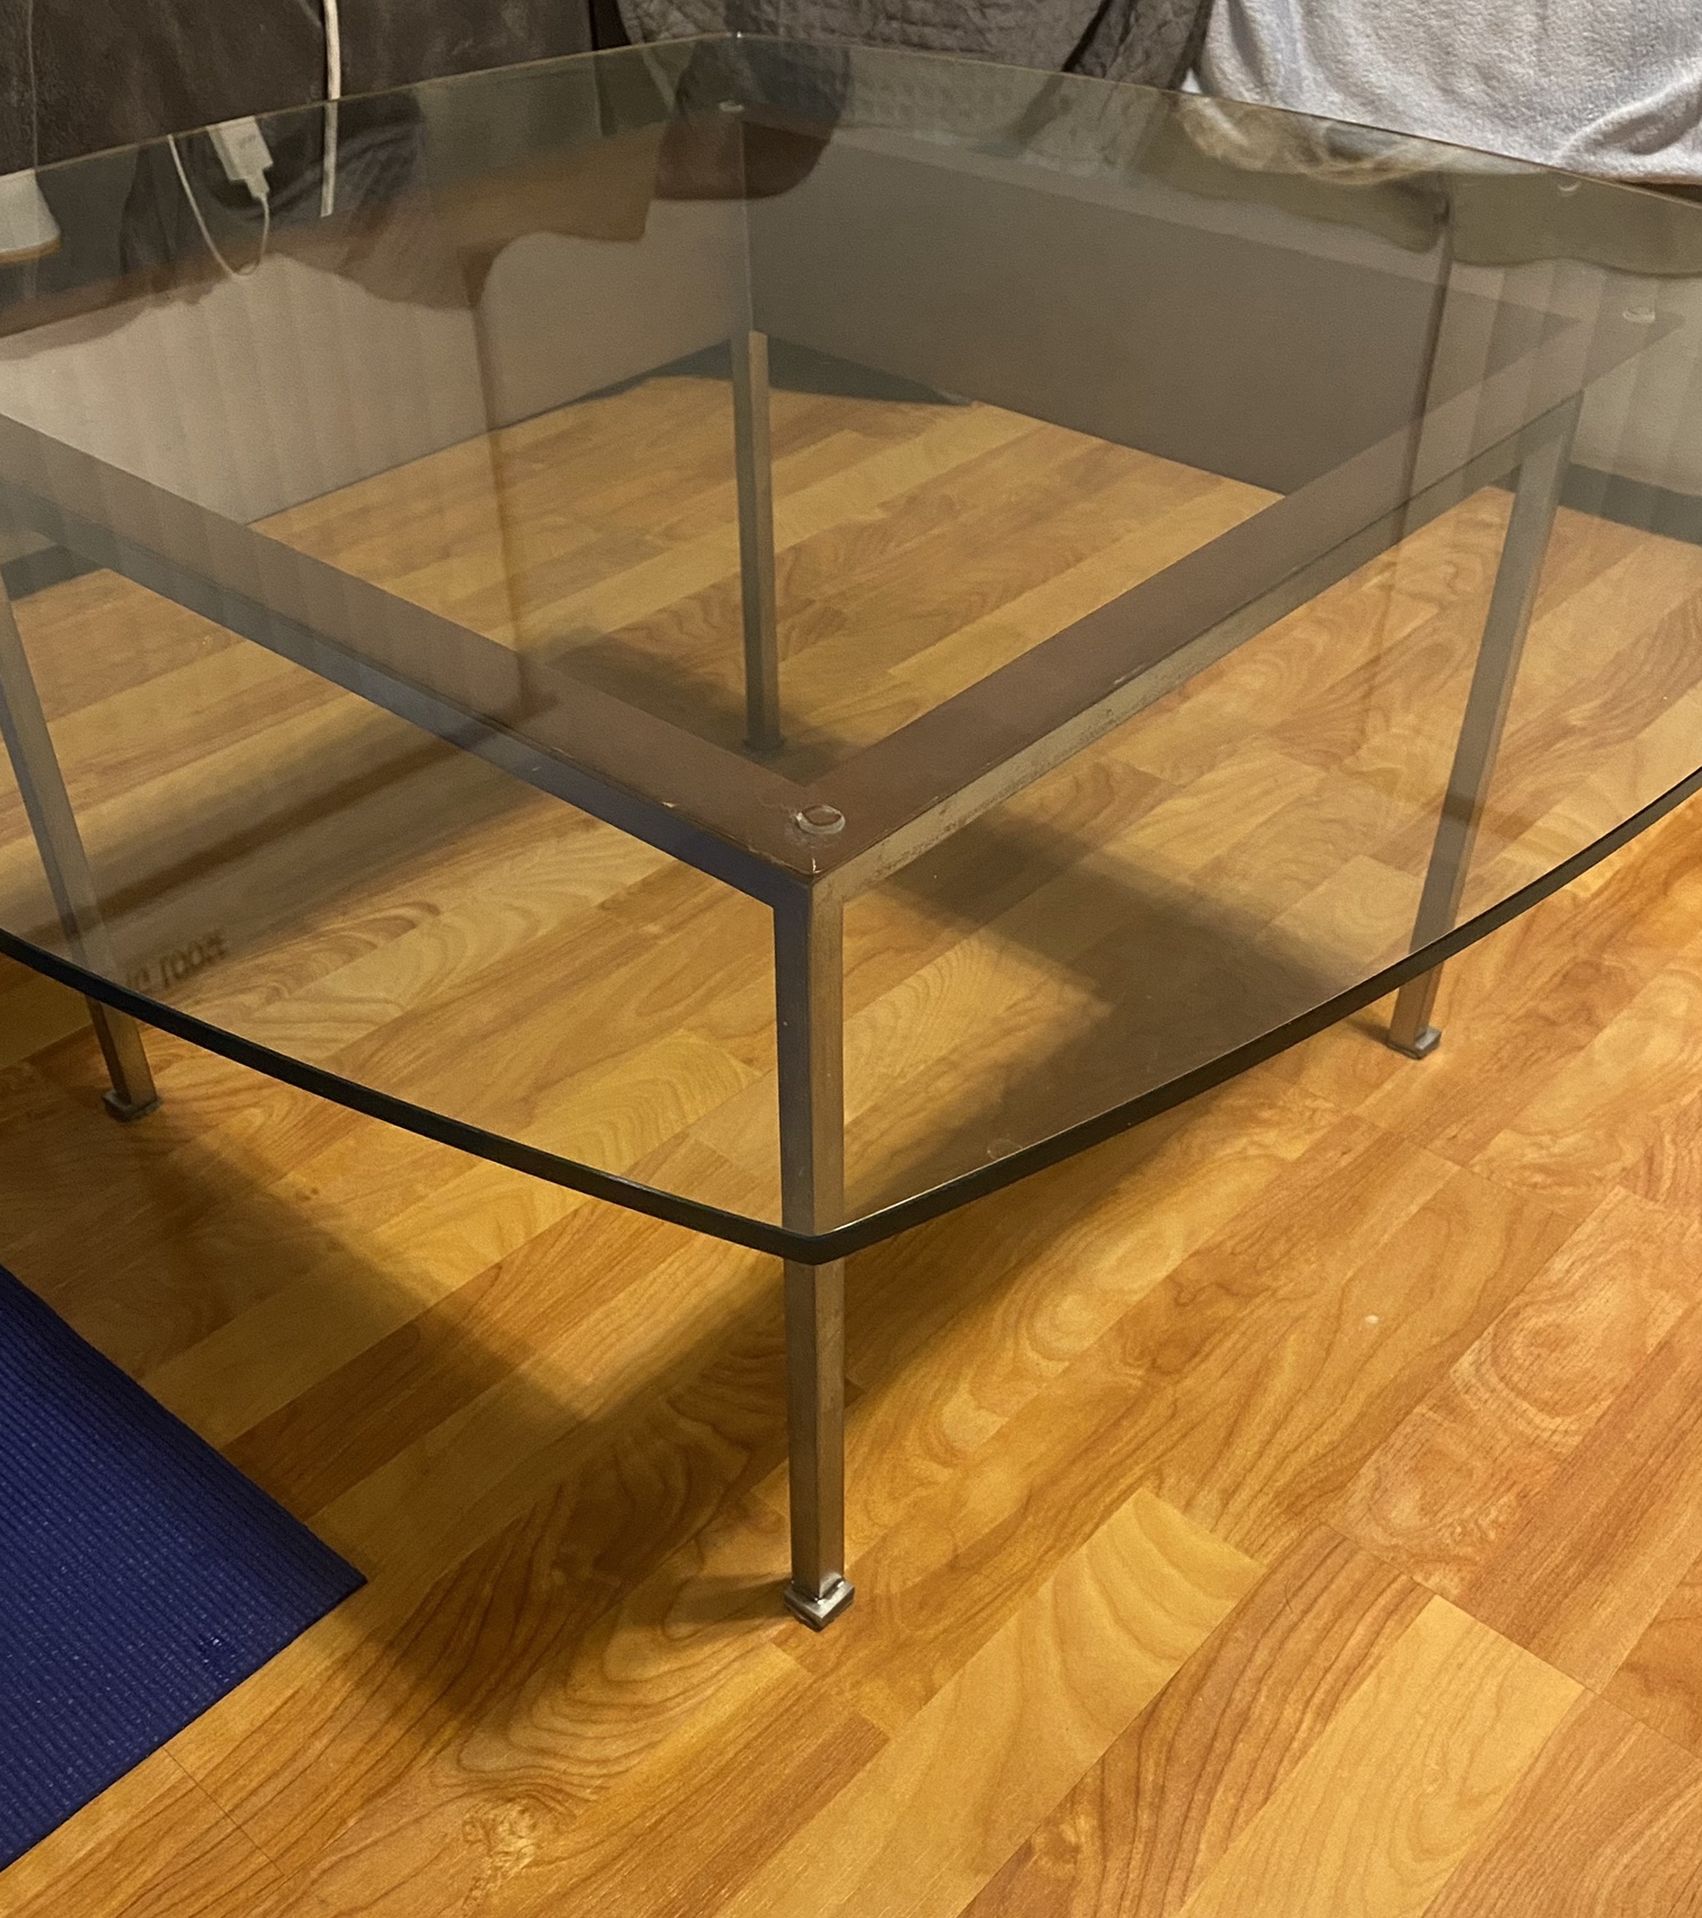 Glass Top Coffee Table 16” tall and the glass is 36” wide on all sides